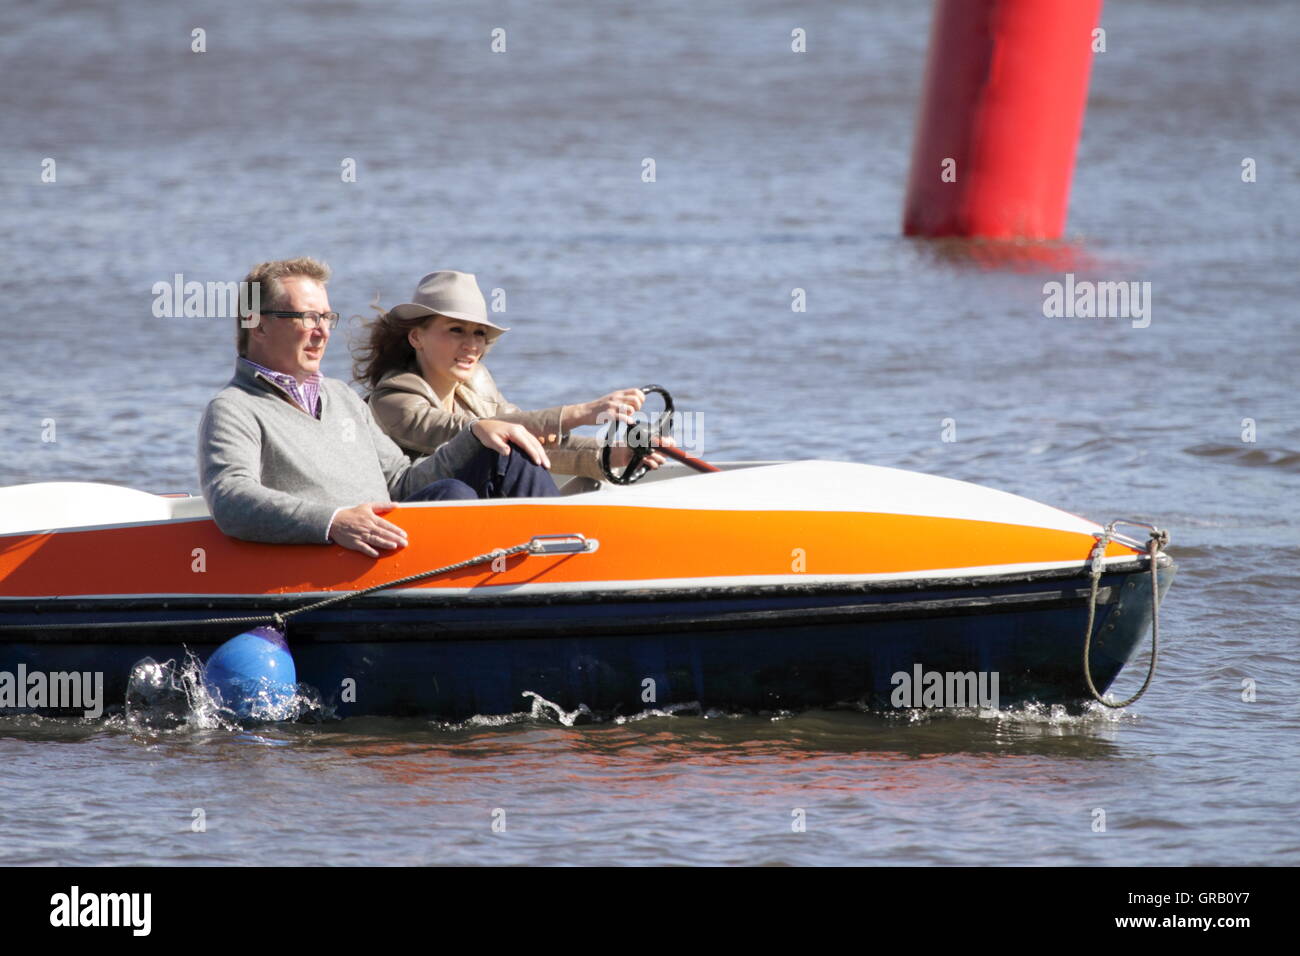 Dr Reiner Brüggestrat And Ina Menzer In A Pedalo On River Alster In Hamburg Stock Photo